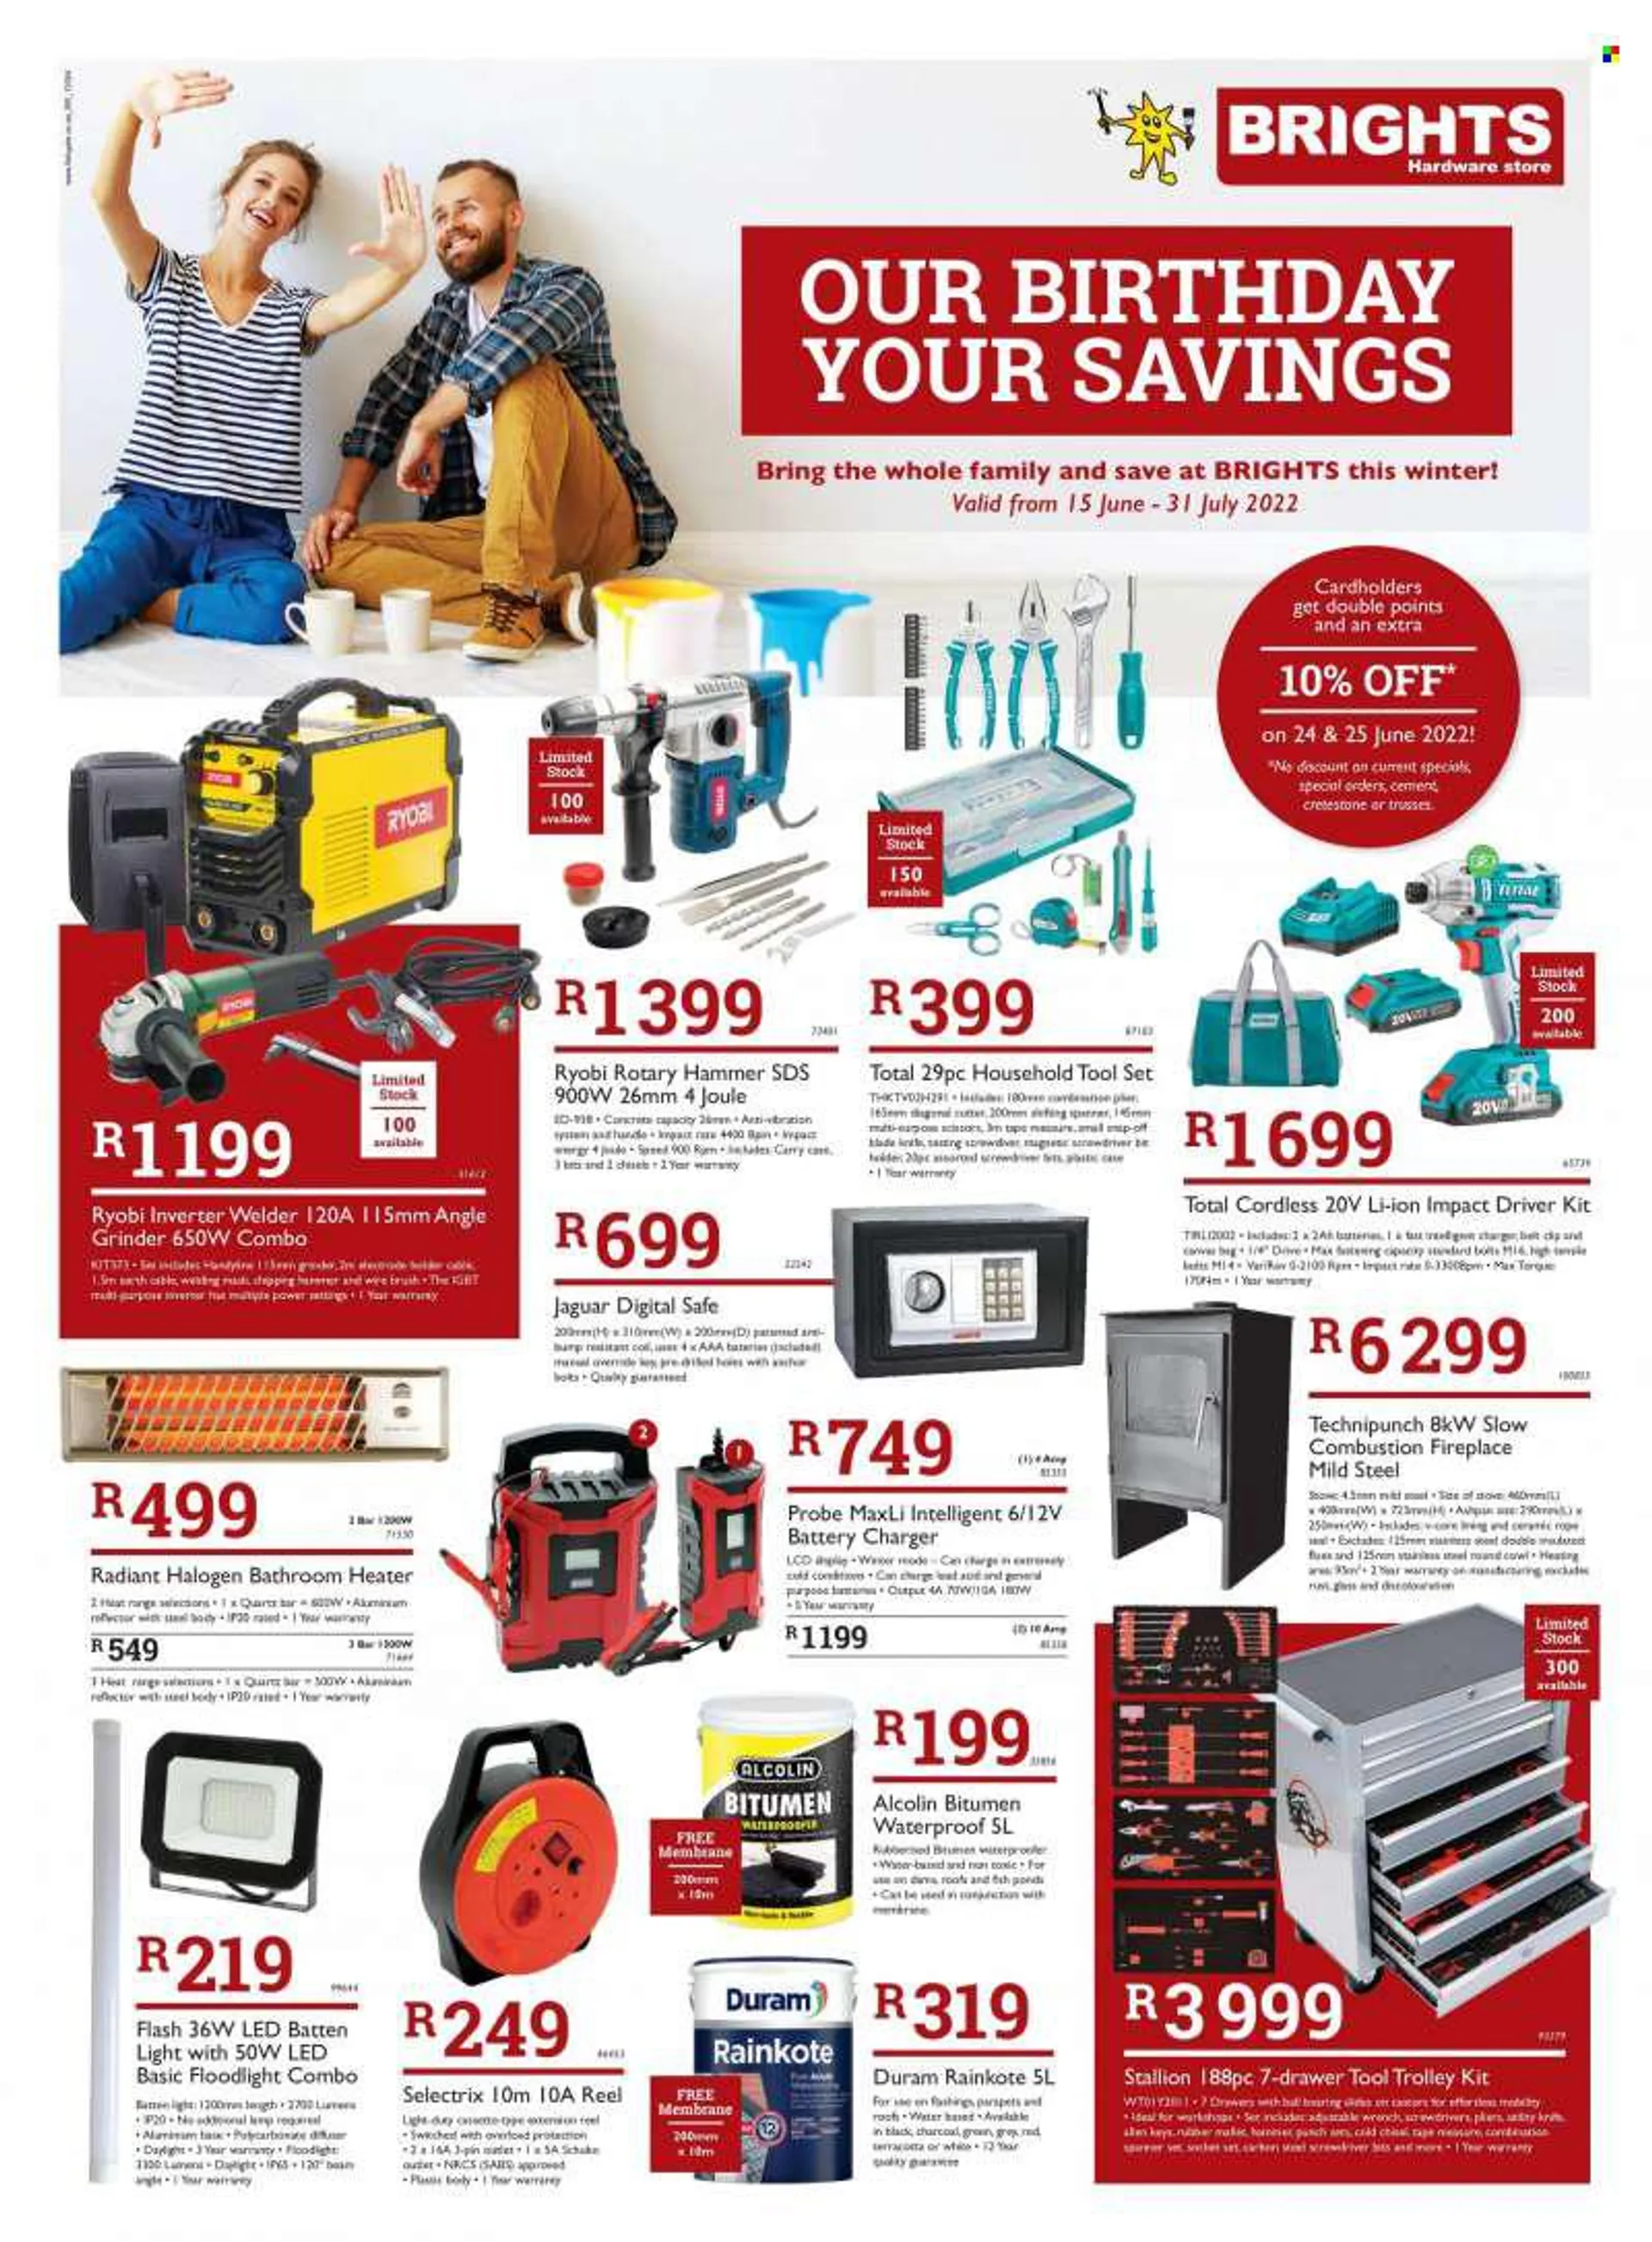 Brights Hardware catalogue  - 15/06/2022 - 31/07/2022 - Sales products - stove, battery charger, grinder, diffuser, Duram, lamp, floodlight, fireplace, impact driver, Ryobi, angle grinder, screwdriver bits, pliers, socket set, scissors, tool set, cutter, 